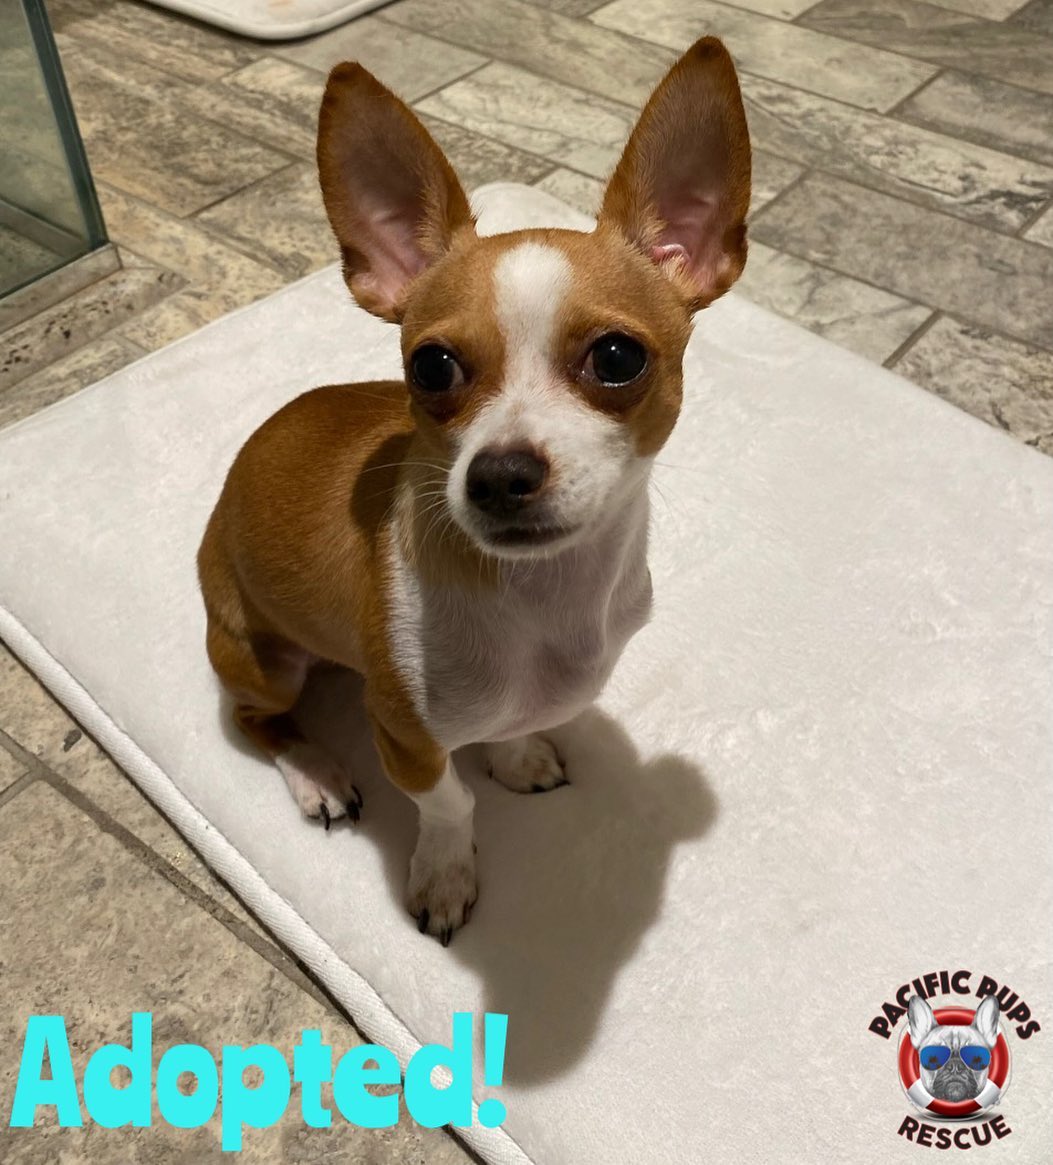 Ziggy and his ears have been adopted! This tiny little guy was surrendered to us, and I think we all fell in love!
He now has his forever home, and his forever best friend!
<a target='_blank' href='https://www.instagram.com/explore/tags/happilyeverafter/'>#happilyeverafter</a> <a target='_blank' href='https://www.instagram.com/explore/tags/adopted/'>#adopted</a> <a target='_blank' href='https://www.instagram.com/explore/tags/foreverhome/'>#foreverhome</a> <a target='_blank' href='https://www.instagram.com/explore/tags/foreverfamily/'>#foreverfamily</a> <a target='_blank' href='https://www.instagram.com/explore/tags/tinydogs/'>#tinydogs</a> <a target='_blank' href='https://www.instagram.com/explore/tags/chihuahua/'>#chihuahua</a> <a target='_blank' href='https://www.instagram.com/explore/tags/adopt/'>#adopt</a> <a target='_blank' href='https://www.instagram.com/explore/tags/foster/'>#foster</a> <a target='_blank' href='https://www.instagram.com/explore/tags/nkla/'>#nkla</a> <a target='_blank' href='https://www.instagram.com/explore/tags/adoptdontshop/'>#adoptdontshop</a><a target='_blank' href='https://www.instagram.com/explore/tags/donate/'>#donate</a> <a target='_blank' href='https://www.instagram.com/explore/tags/support/'>#support</a> <a target='_blank' href='https://www.instagram.com/explore/tags/losangeles/'>#losangeles</a> <a target='_blank' href='https://www.instagram.com/explore/tags/rescuedog/'>#rescuedog</a> <a target='_blank' href='https://www.instagram.com/explore/tags/shelterdog/'>#shelterdog</a> <a target='_blank' href='https://www.instagram.com/explore/tags/rescuedismyfavoritebreed/'>#rescuedismyfavoritebreed</a> <a target='_blank' href='https://www.instagram.com/explore/tags/rescuedogsofinstagram/'>#rescuedogsofinstagram</a> <a target='_blank' href='https://www.instagram.com/explore/tags/dog/'>#dog</a> <a target='_blank' href='https://www.instagram.com/explore/tags/dogsofinstagram/'>#dogsofinstagram</a> <a target='_blank' href='https://www.instagram.com/explore/tags/rescue/'>#rescue</a> <a target='_blank' href='https://www.instagram.com/explore/tags/shelterdogsofinstagram/'>#shelterdogsofinstagram</a> <a target='_blank' href='https://www.instagram.com/explore/tags/whorescuedwho/'>#whorescuedwho</a> <a target='_blank' href='https://www.instagram.com/explore/tags/fosteringsaveslives/'>#fosteringsaveslives</a> <a target='_blank' href='https://www.instagram.com/explore/tags/fosterme/'>#fosterme</a> <a target='_blank' href='https://www.instagram.com/explore/tags/adoptme/'>#adoptme</a> <a target='_blank' href='https://www.instagram.com/explore/tags/savethemall/'>#savethemall</a> <a target='_blank' href='https://www.instagram.com/explore/tags/losangeles/'>#losangeles</a> <a target='_blank' href='https://www.instagram.com/explore/tags/socal/'>#socal</a> <a target='_blank' href='https://www.instagram.com/explore/tags/adoptabledogsofinstagram/'>#adoptabledogsofinstagram</a> <a target='_blank' href='https://www.instagram.com/explore/tags/adoptabledogsoflosangeles/'>#adoptabledogsoflosangeles</a>